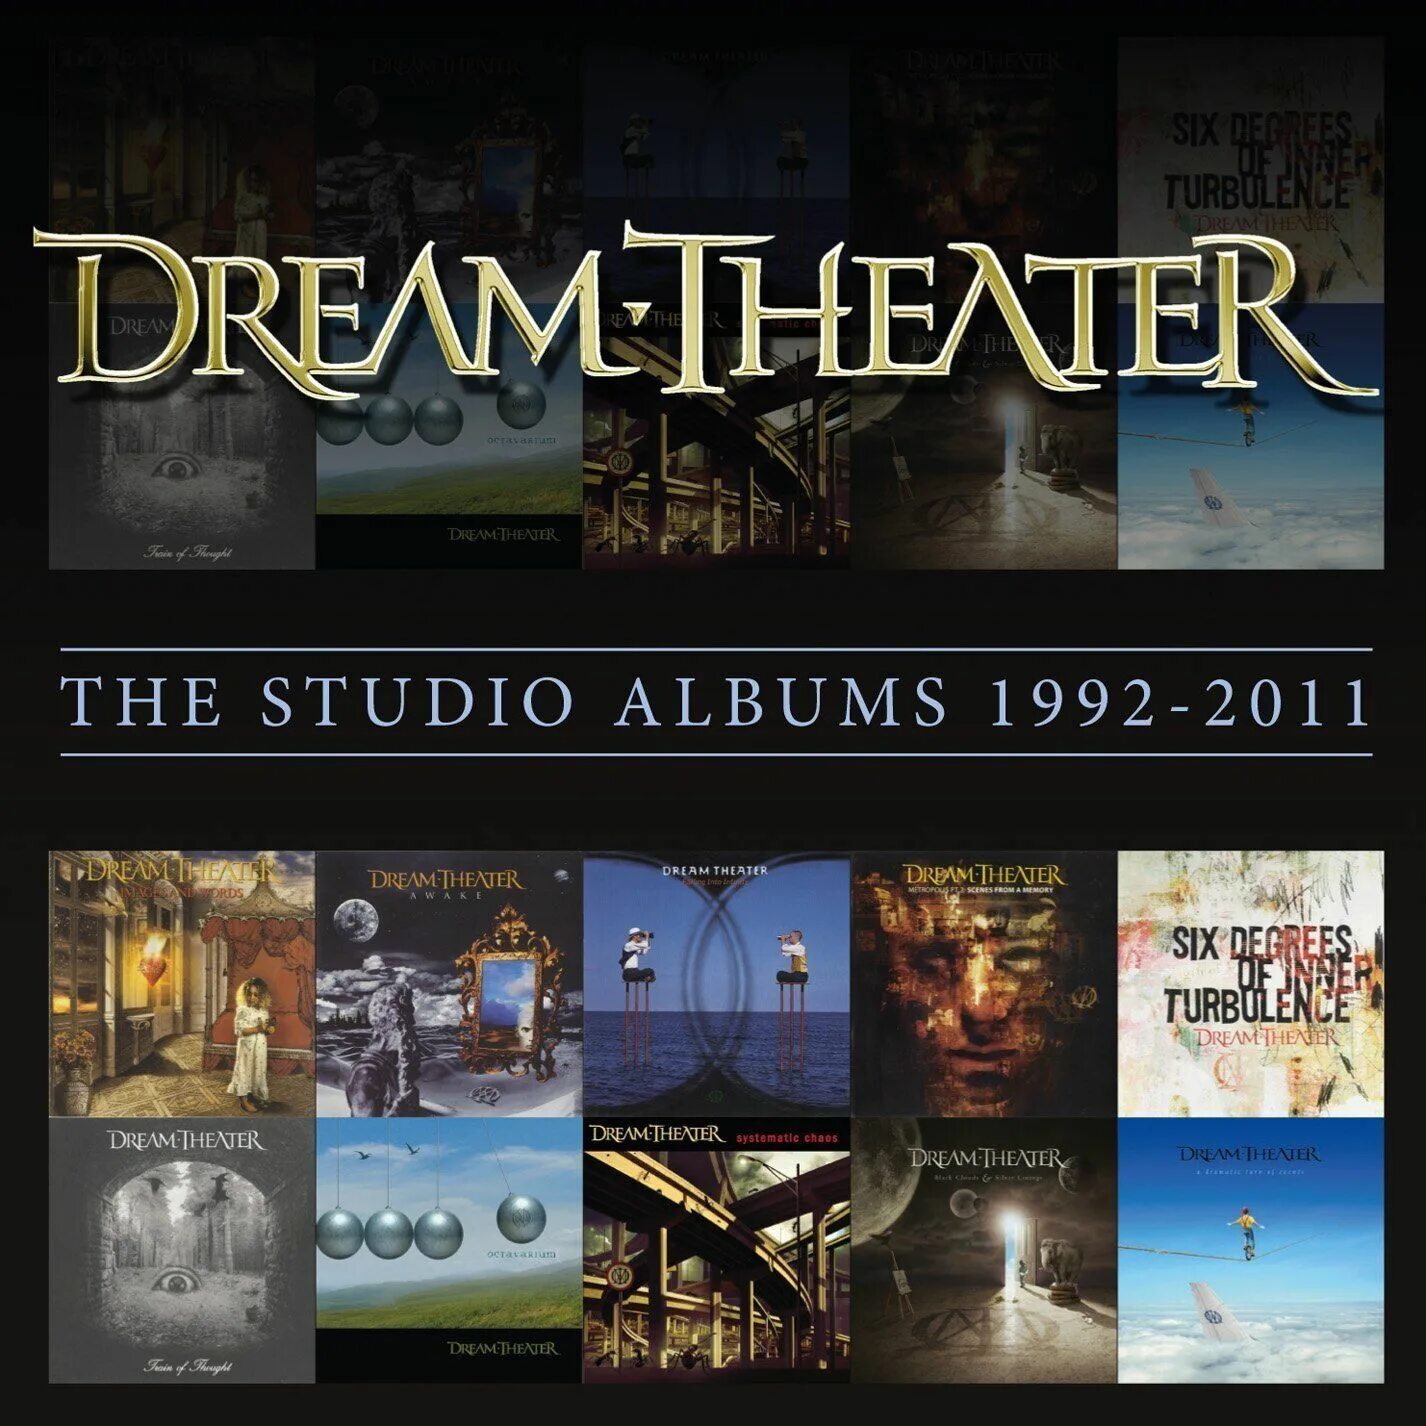 The Studio albums 1992-2011 Dream Theater. Dream Theater CD. Dream Theater ,,the Studio albums 1992-2011'' 10cd Box Set. Dream theater альбомы